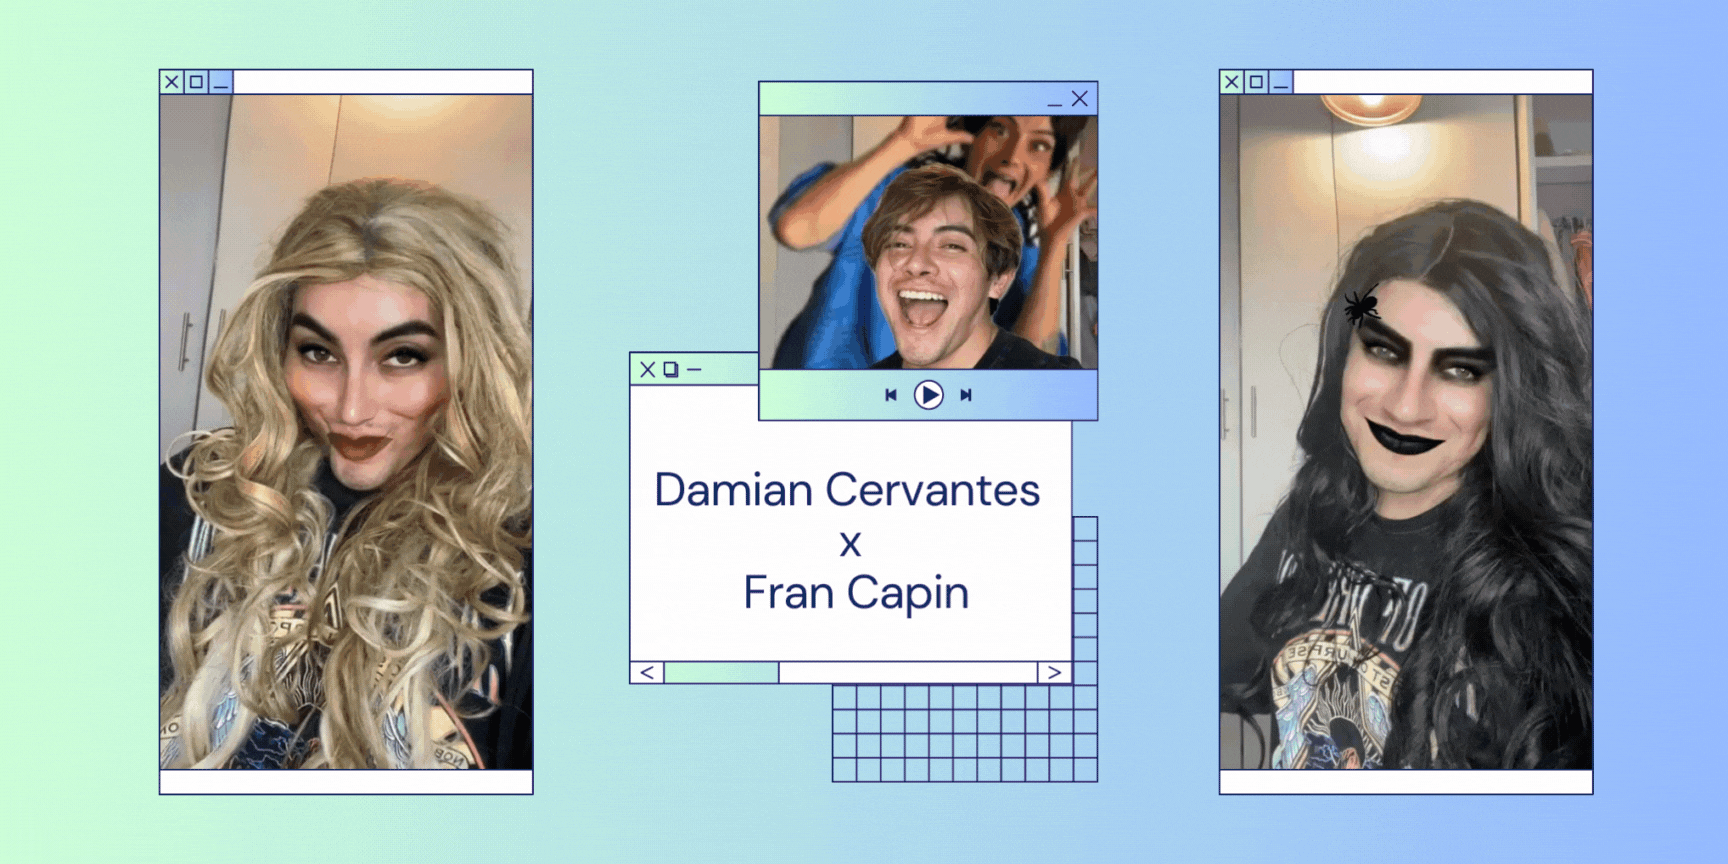 Characters for the influencer Damian Cervantes AR experiences